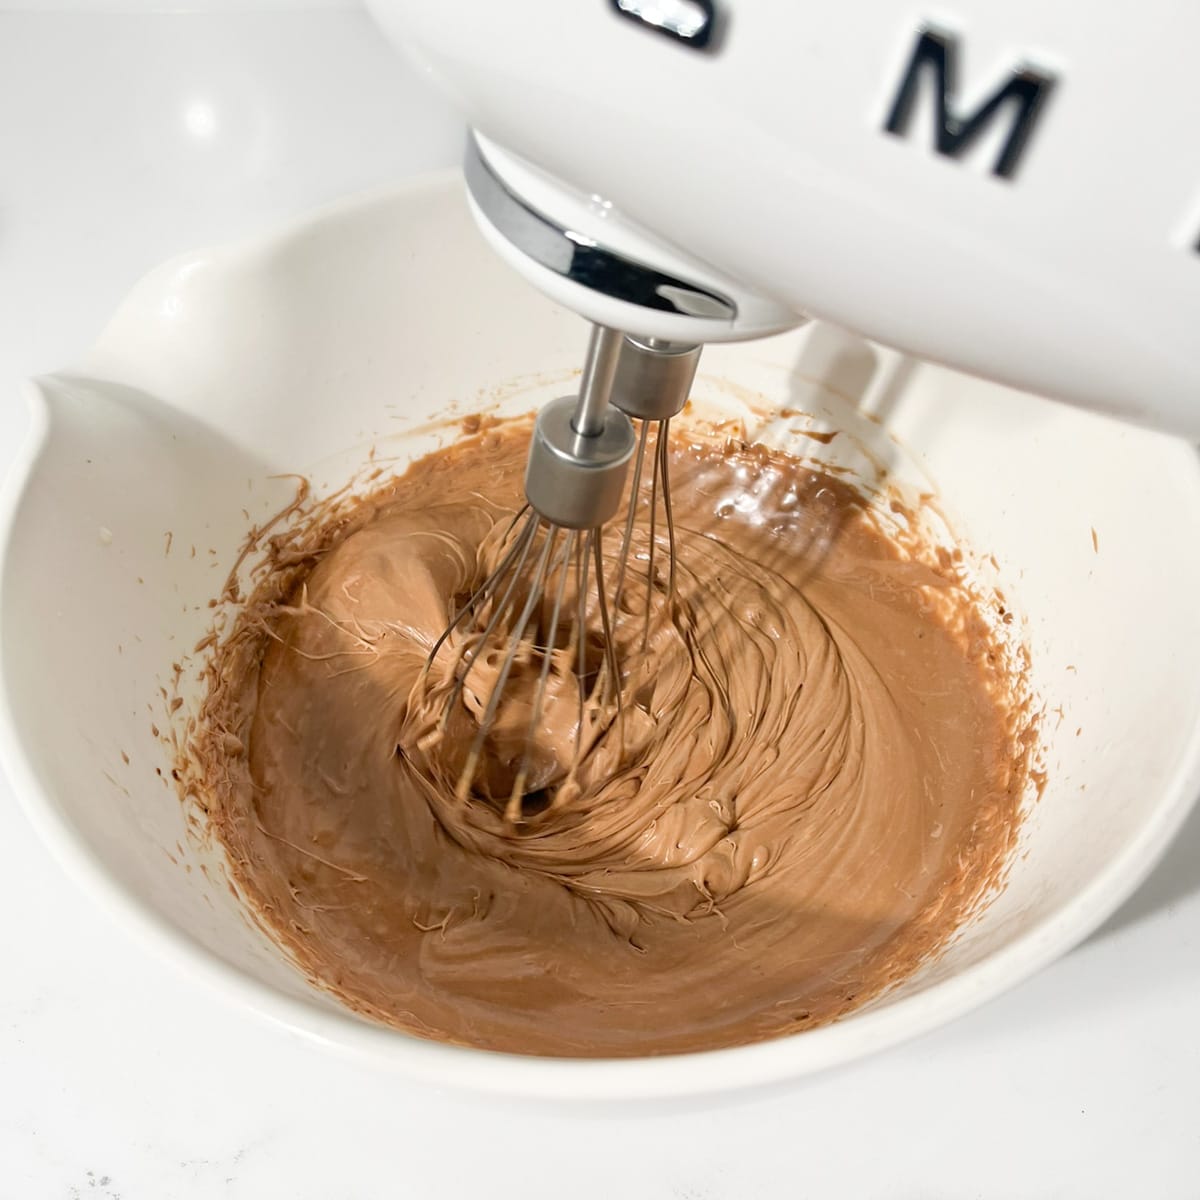 Whisking the mousse into soft peaks with an electric hand mixer